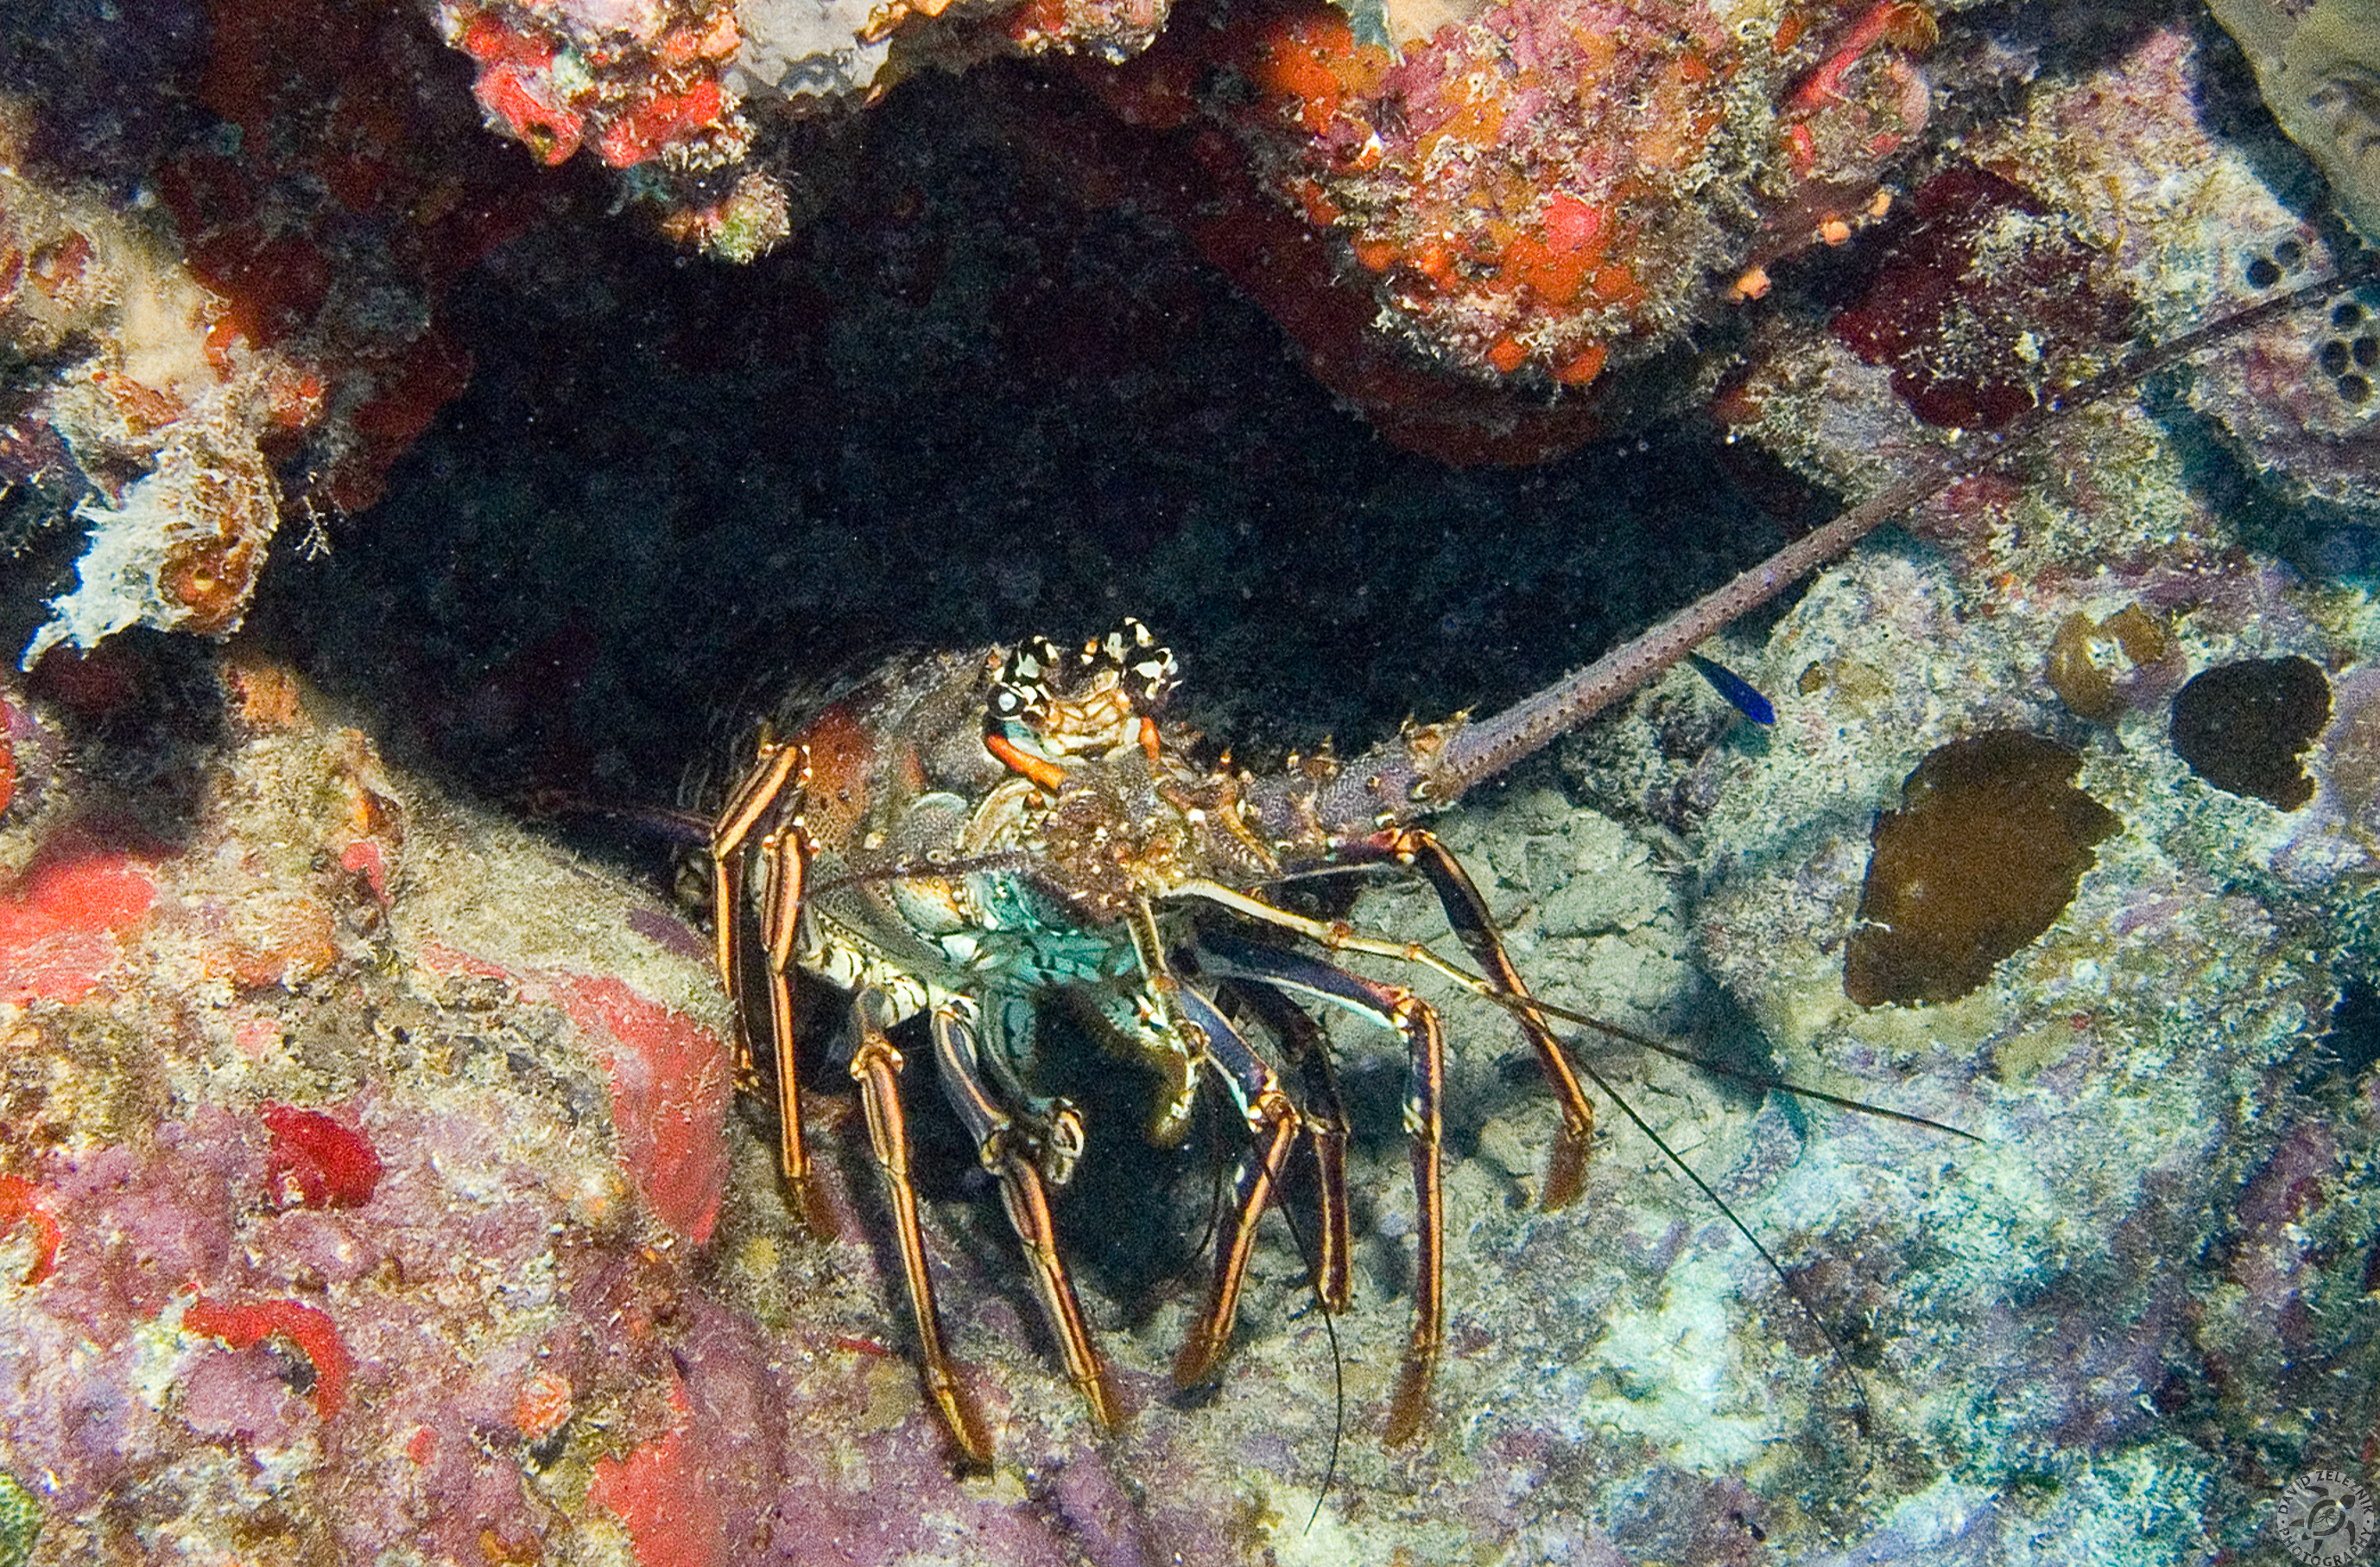 A Spiny Caribbean Lobster advances out of its hole